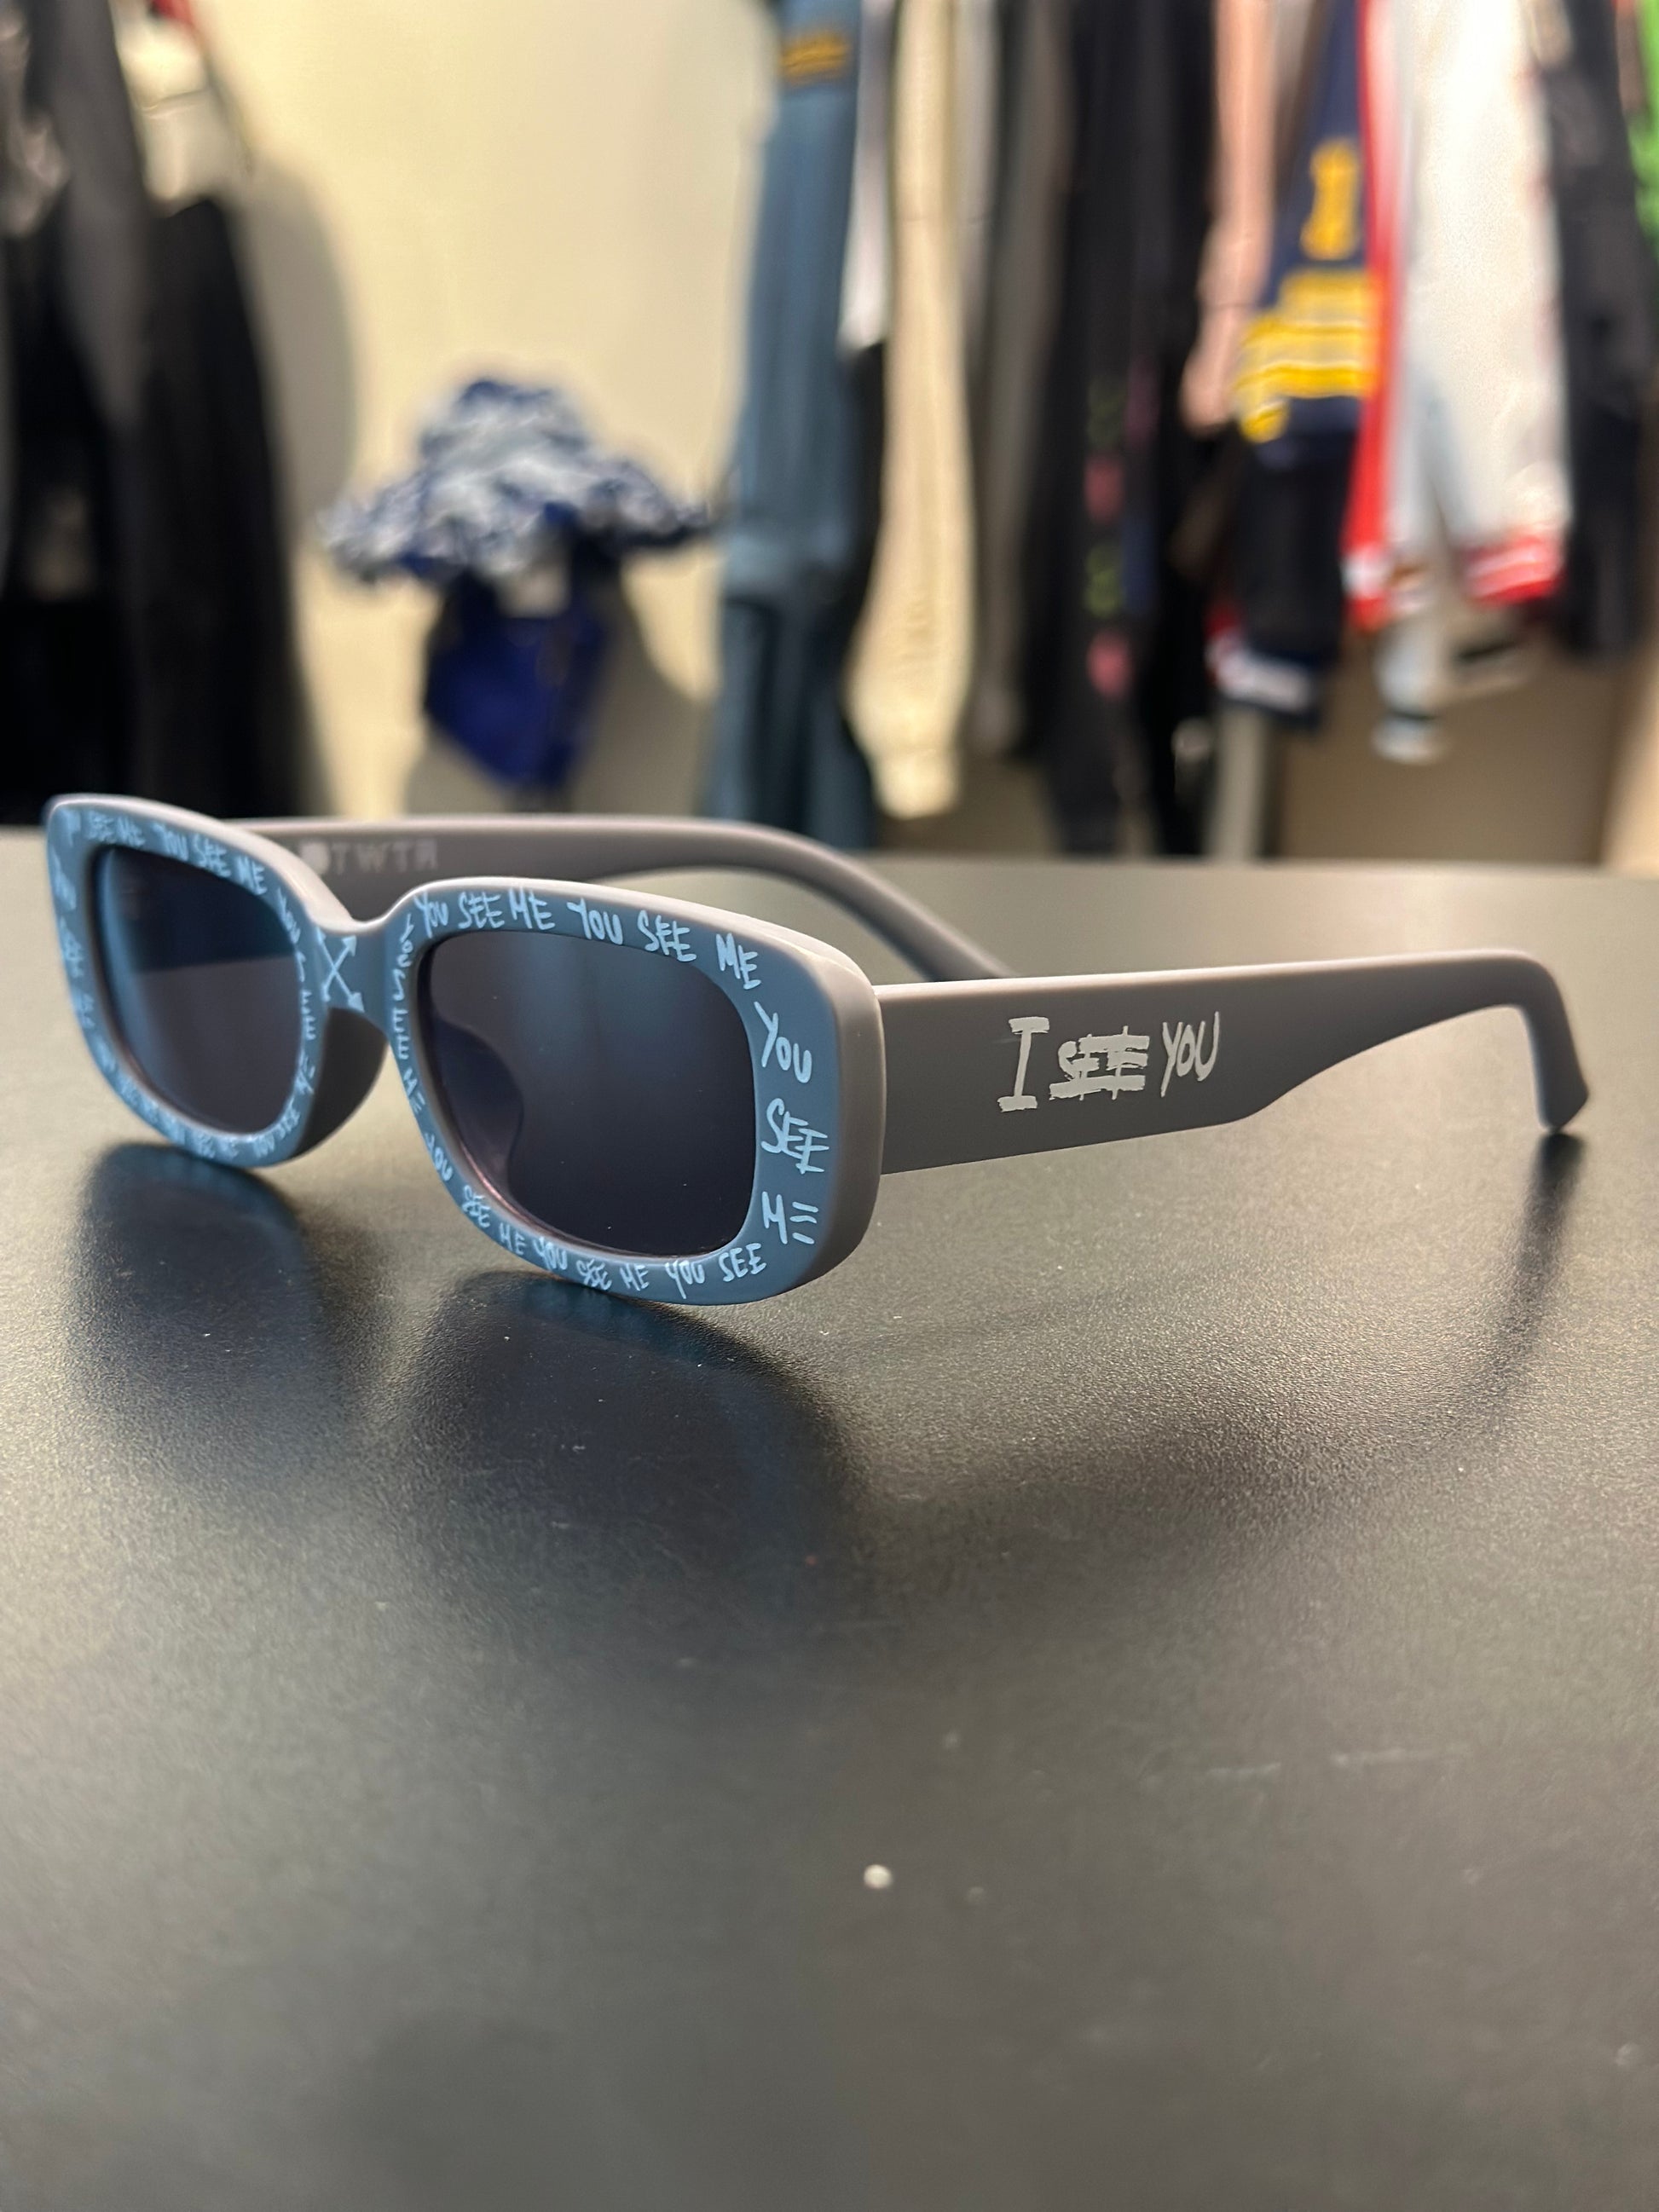  KNOTWTR: I SEE YOU/ RELAX SUNGLASSES (GREY)